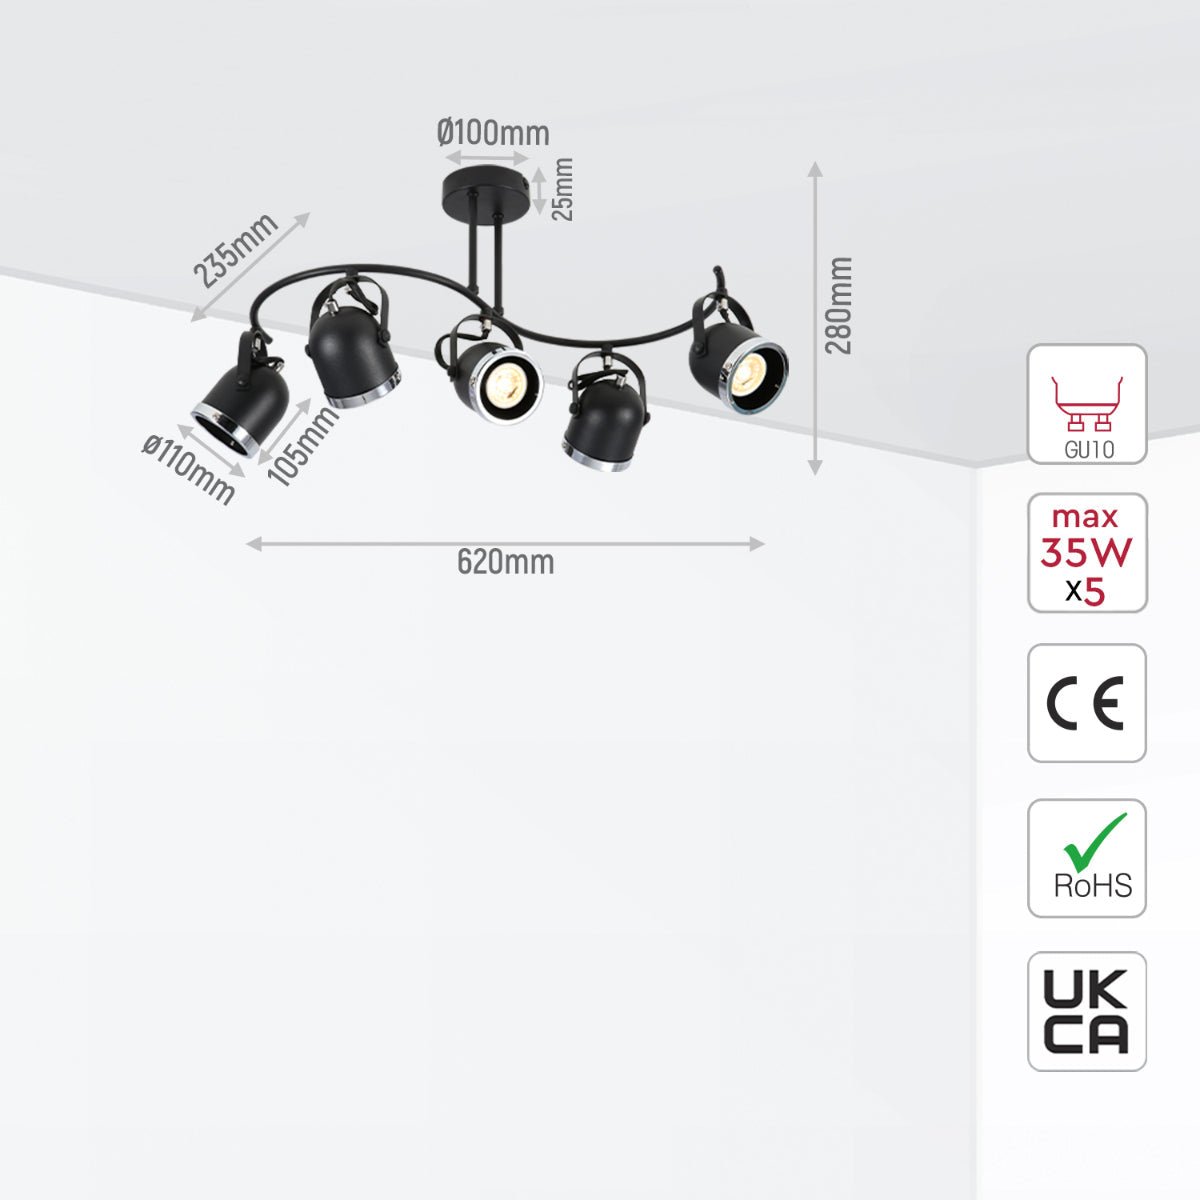 Size and specs of 5 way Spotlight Black and Chrome S shape with GU10 Fitting | TEKLED 172-03108